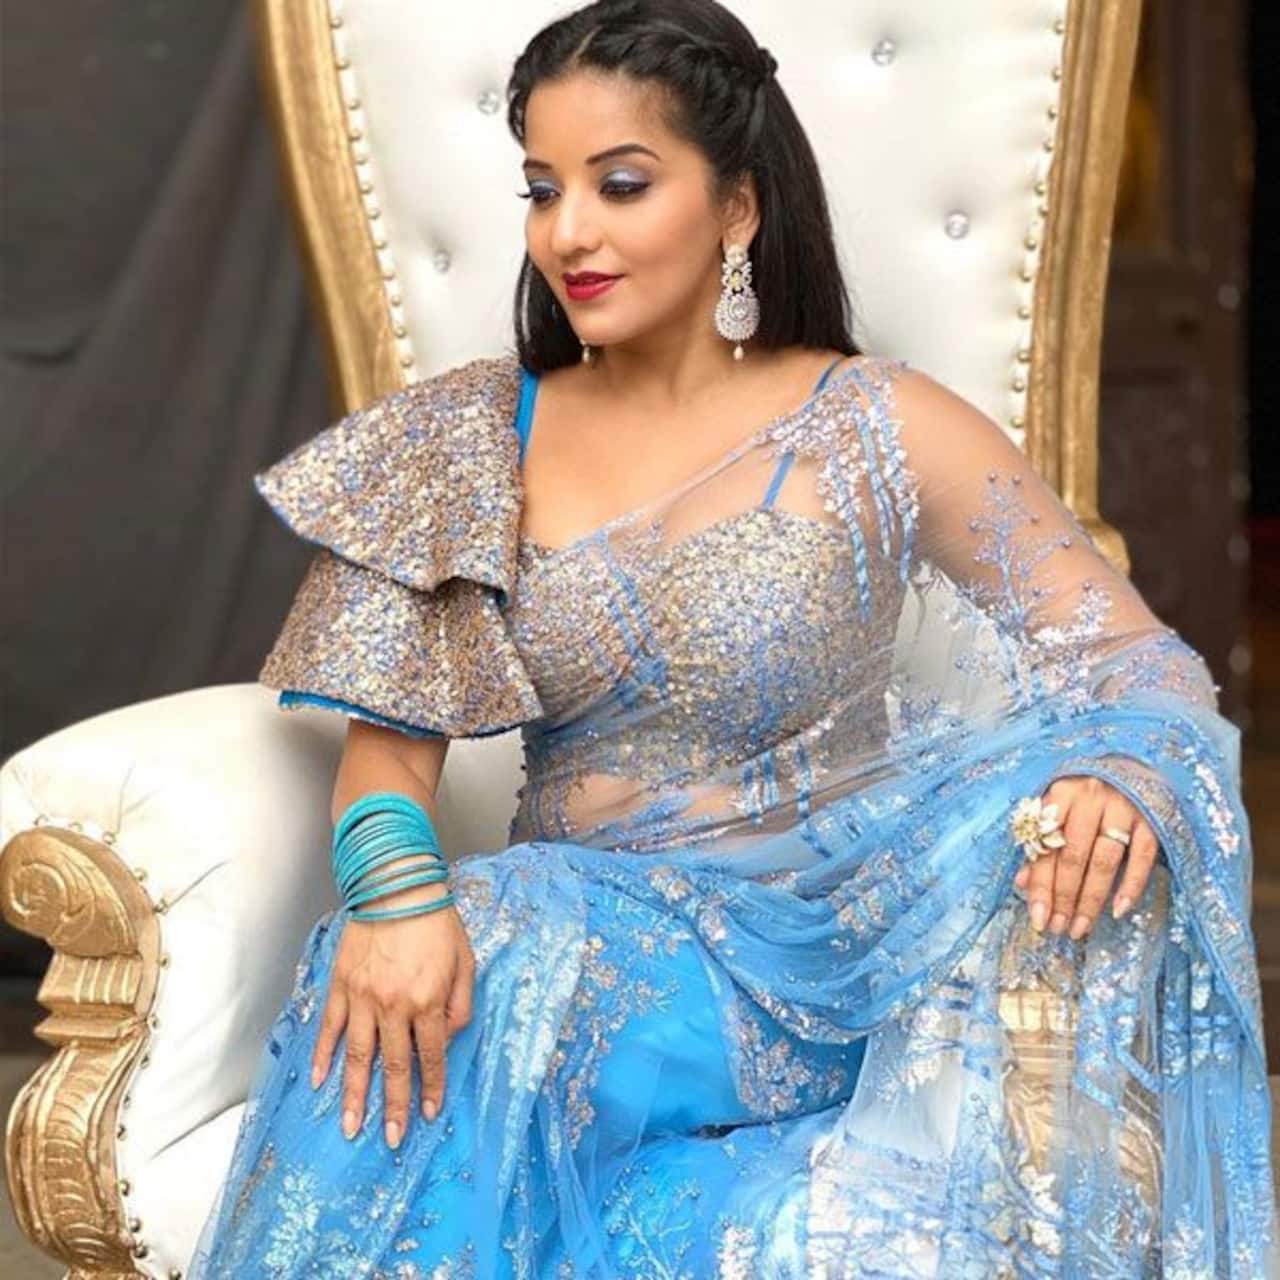 Nazar actress Monalisa looks the prettiest in THIS sexy blue saree